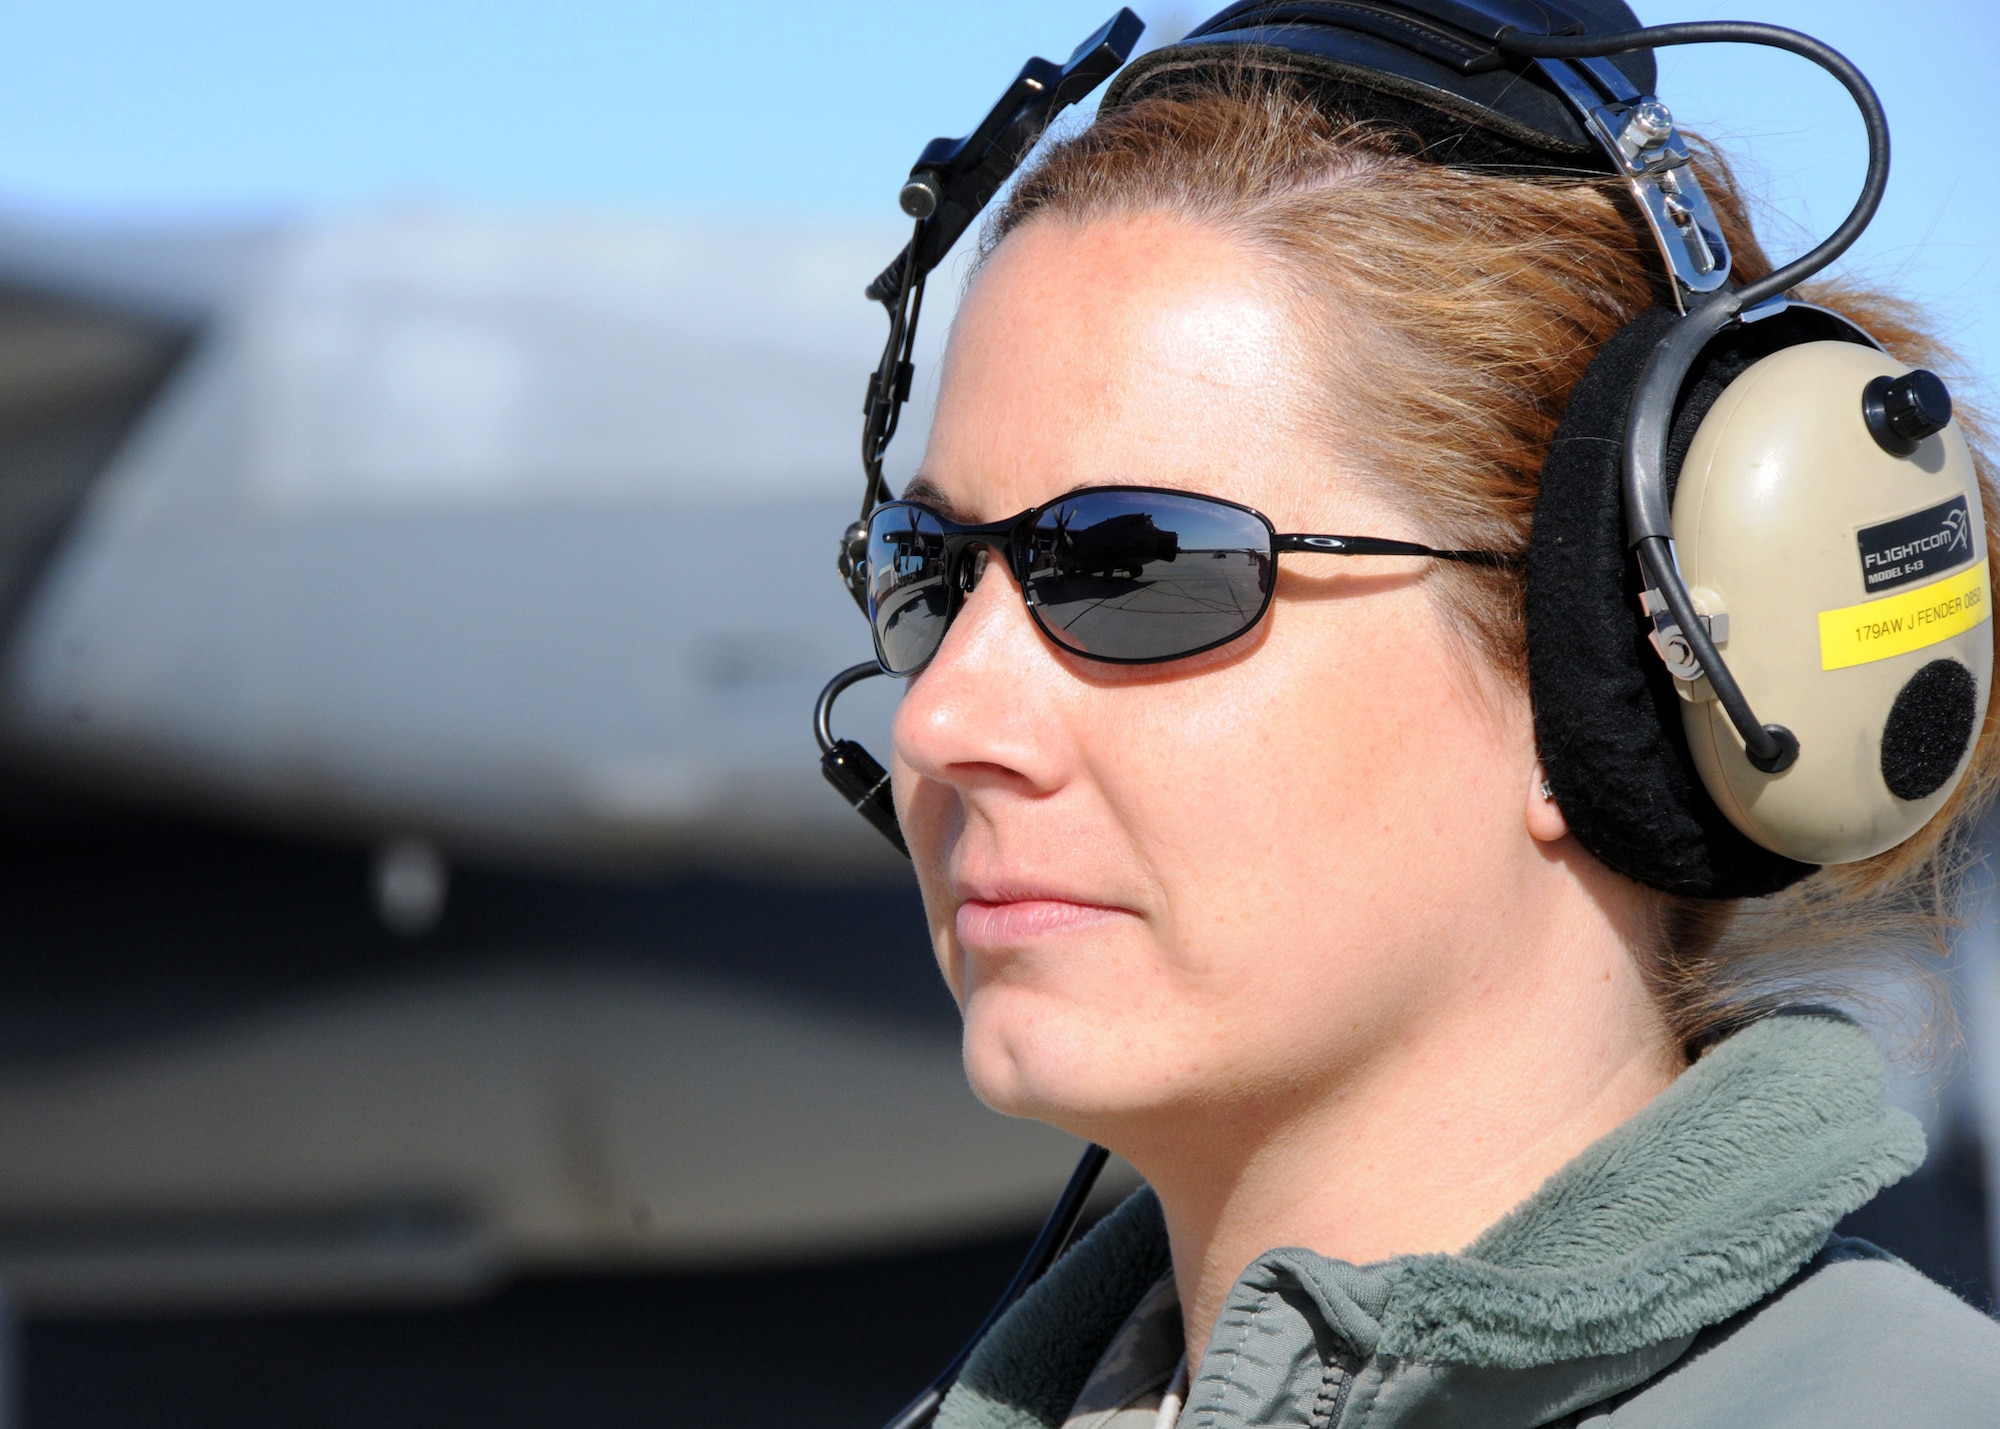 Staff Sgt. Jennifer Fender, 179th Maintenance Group, watches MC-130E Combat Talon #567 prior to its final flight May 7 from Gowen Field, Idaho.  919th Special Operations Wing maintainers, along with the 179th were sent to Boise, Idaho, to prepare four Talons to take off for one more mission – a flight into retirement and decommissioning.  Three of the Talons flew to Davis-Monthan Air Force Base, Ariz.  The other went to Hurlburt Field, Fla., to be placed in the Air Force Special Operations Command airpark.  (U.S. Air Force photo/Tech. Sgt. Samuel King Jr.)